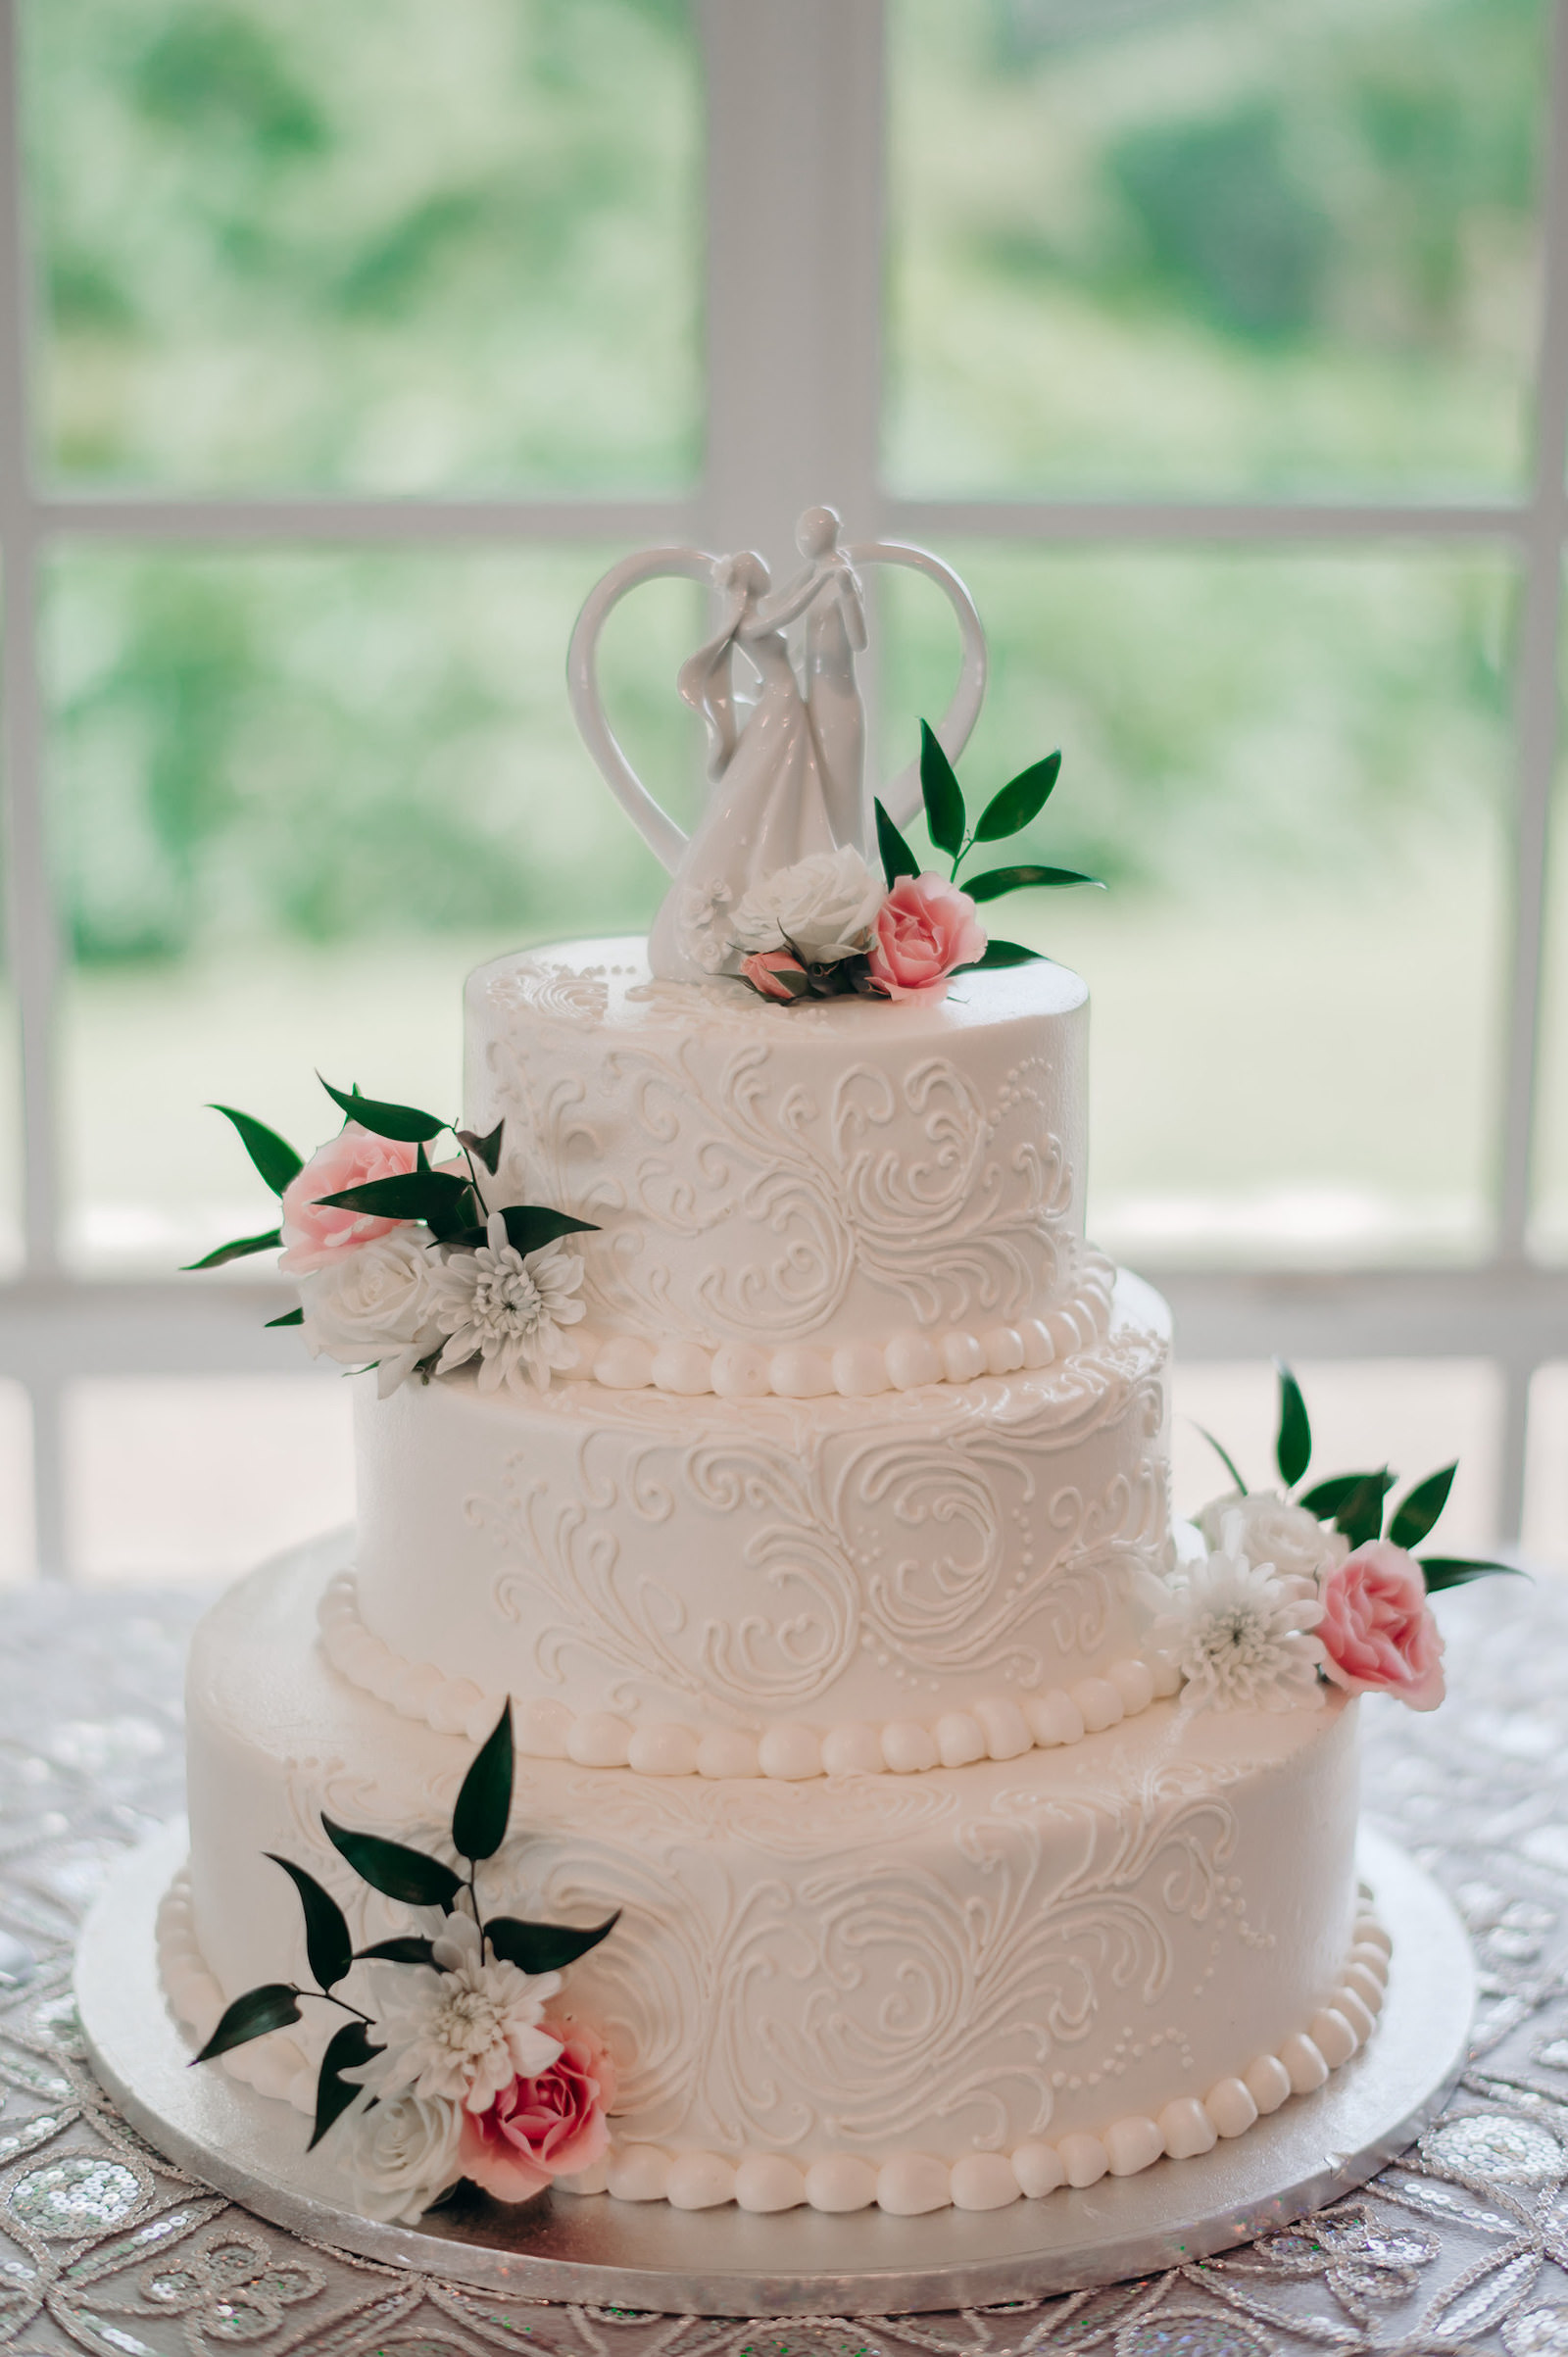 Three Tier White Detailed Cake with Pink, White, and Greenery Floral Detailing and Bride and Groom Cake Topper